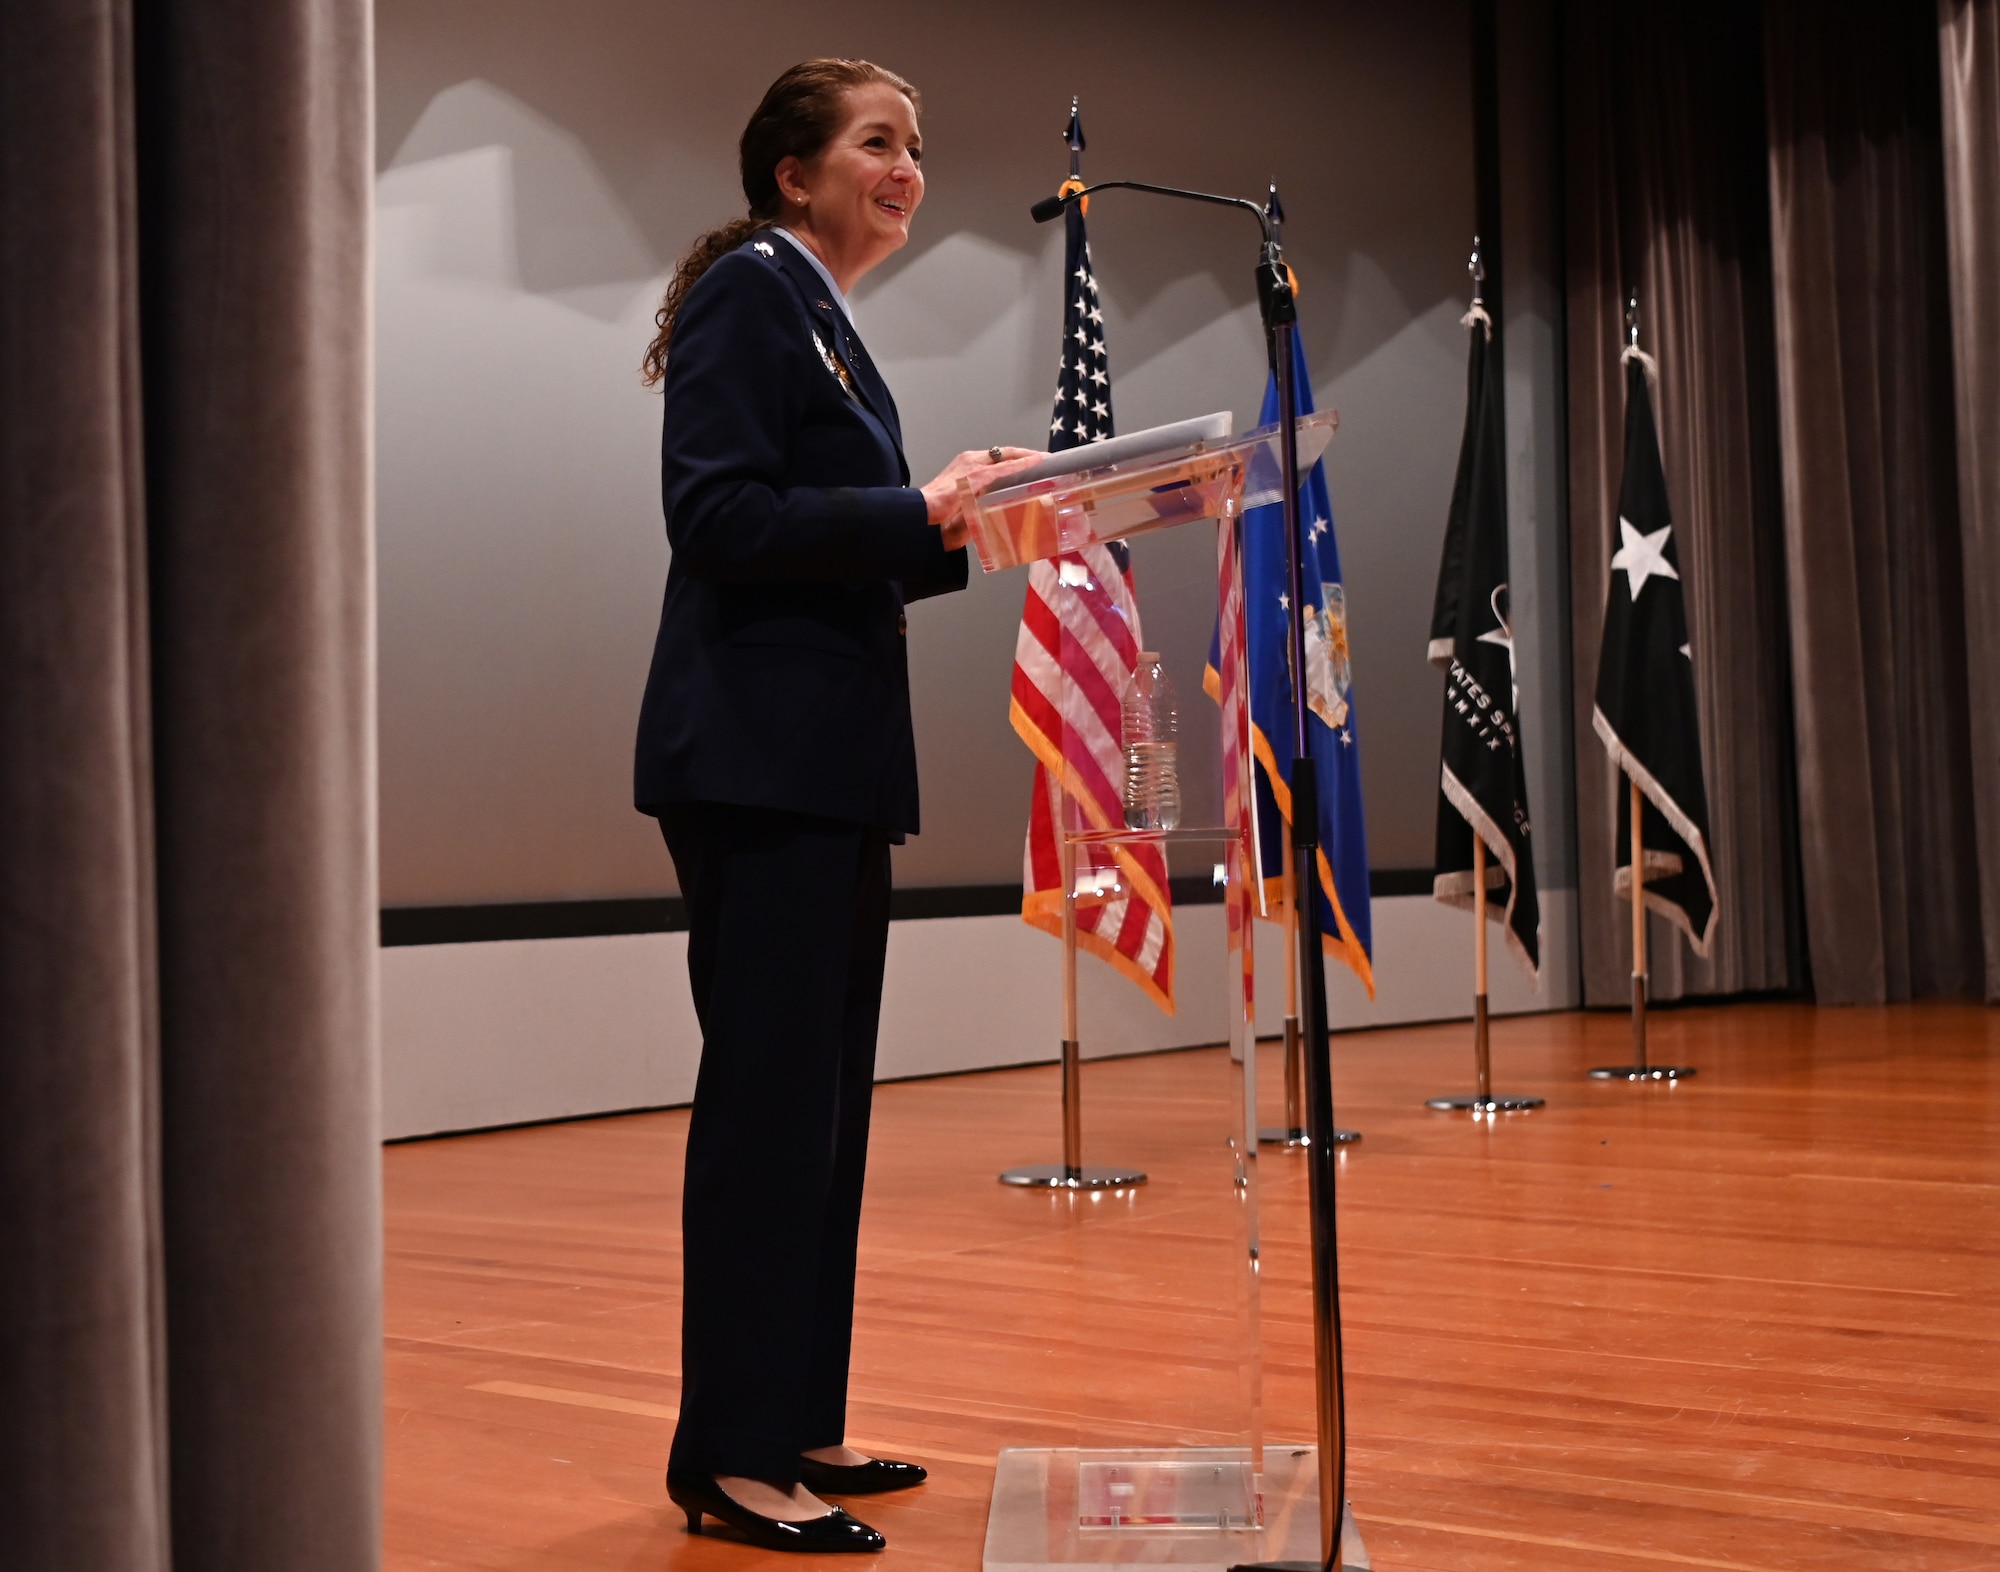 Lt. Gen. Nina Armagno, U.S. Space Force Headquarters director of staff, speaks at the 533rd Training Squadron graduation ceremony at Vandenberg Space Force Base, Calif., Feb. 24, 2023. Armagno is responsible for synchronizing policy, plans, positions, procedures, and cross functional issues for the U.S. Space Force headquarters staff. (U.S. Space Force photo by Senior Airman Tiarra Sibley)